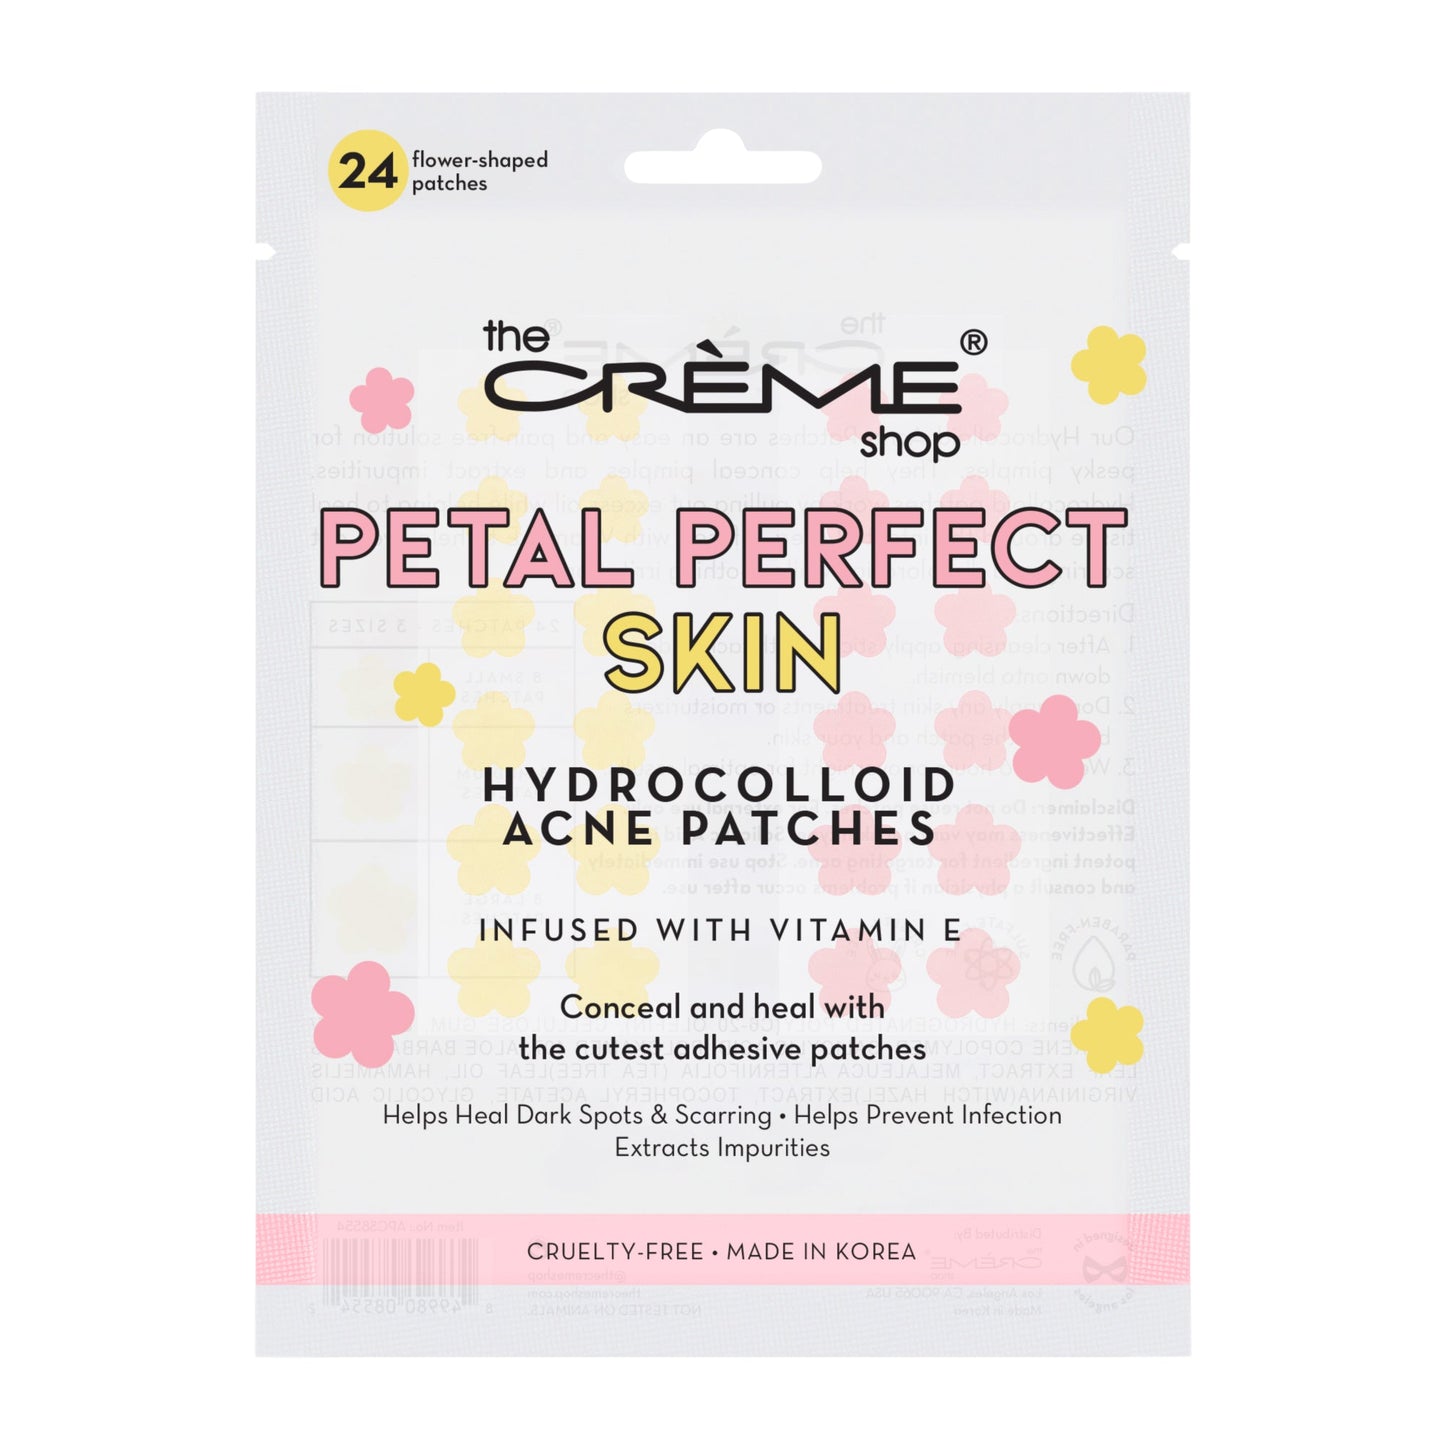 Petal Perfect Skin - Hydrocolloid Acne Patches | Pink & Yellow Hydrocolloid Acne Patches The Crème Shop Single 